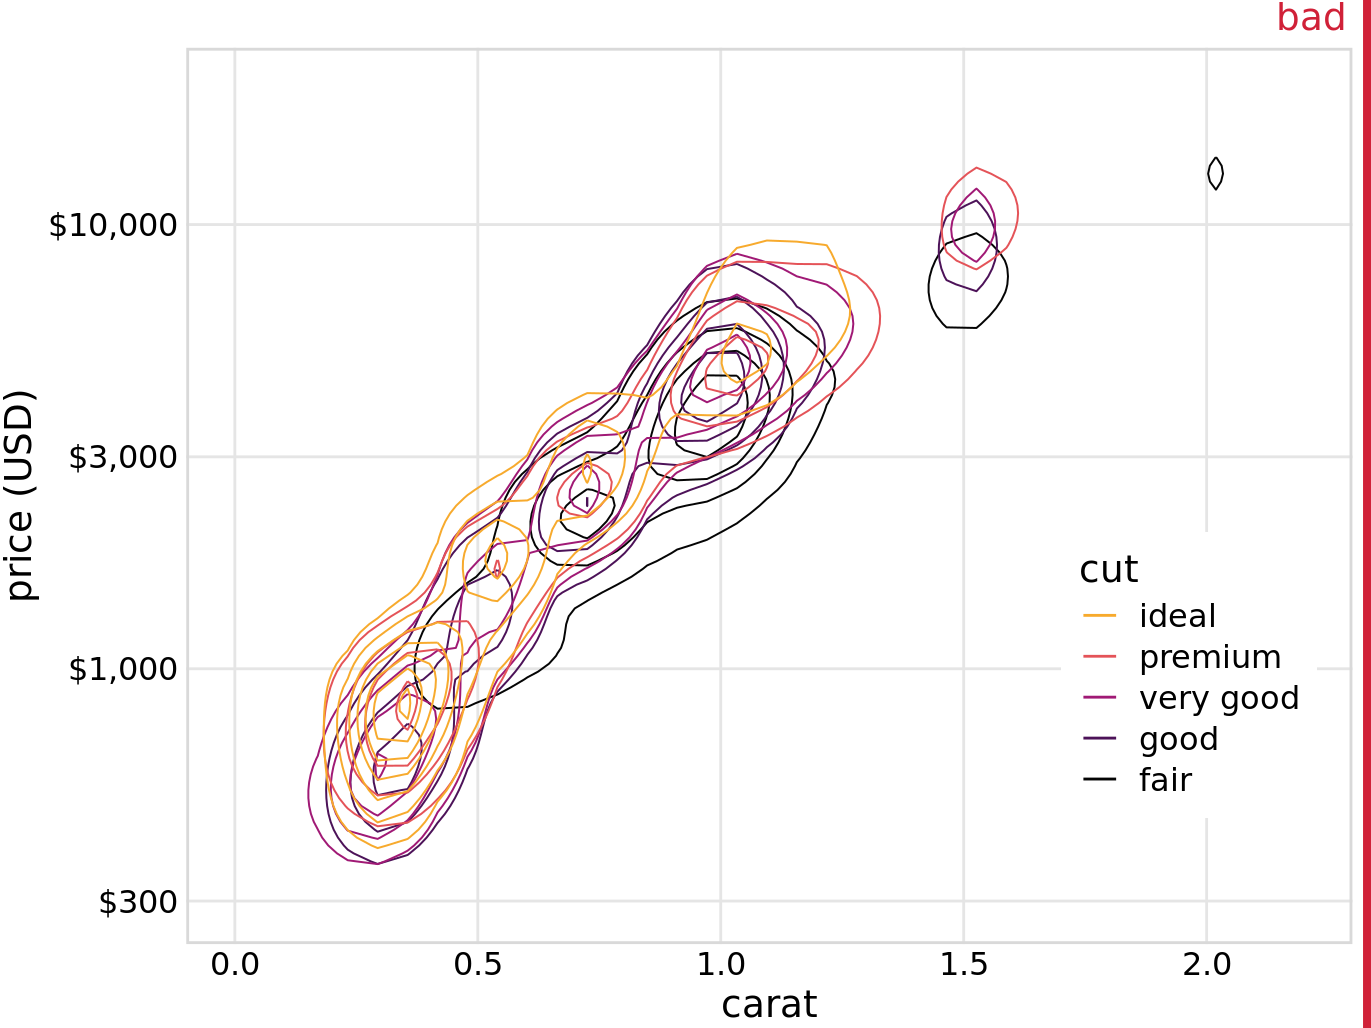 Price of diamonds versus their carat value. As Figure 18.11, but now individual points have been replaced by contour lines. The resulting plot is still labeled “bad”, because the contour lines all lie on top of each other. Neither the point distribution for individual cuts nor the overall point distribution can be discerned. Data source: Hadley Wickham, ggplot2